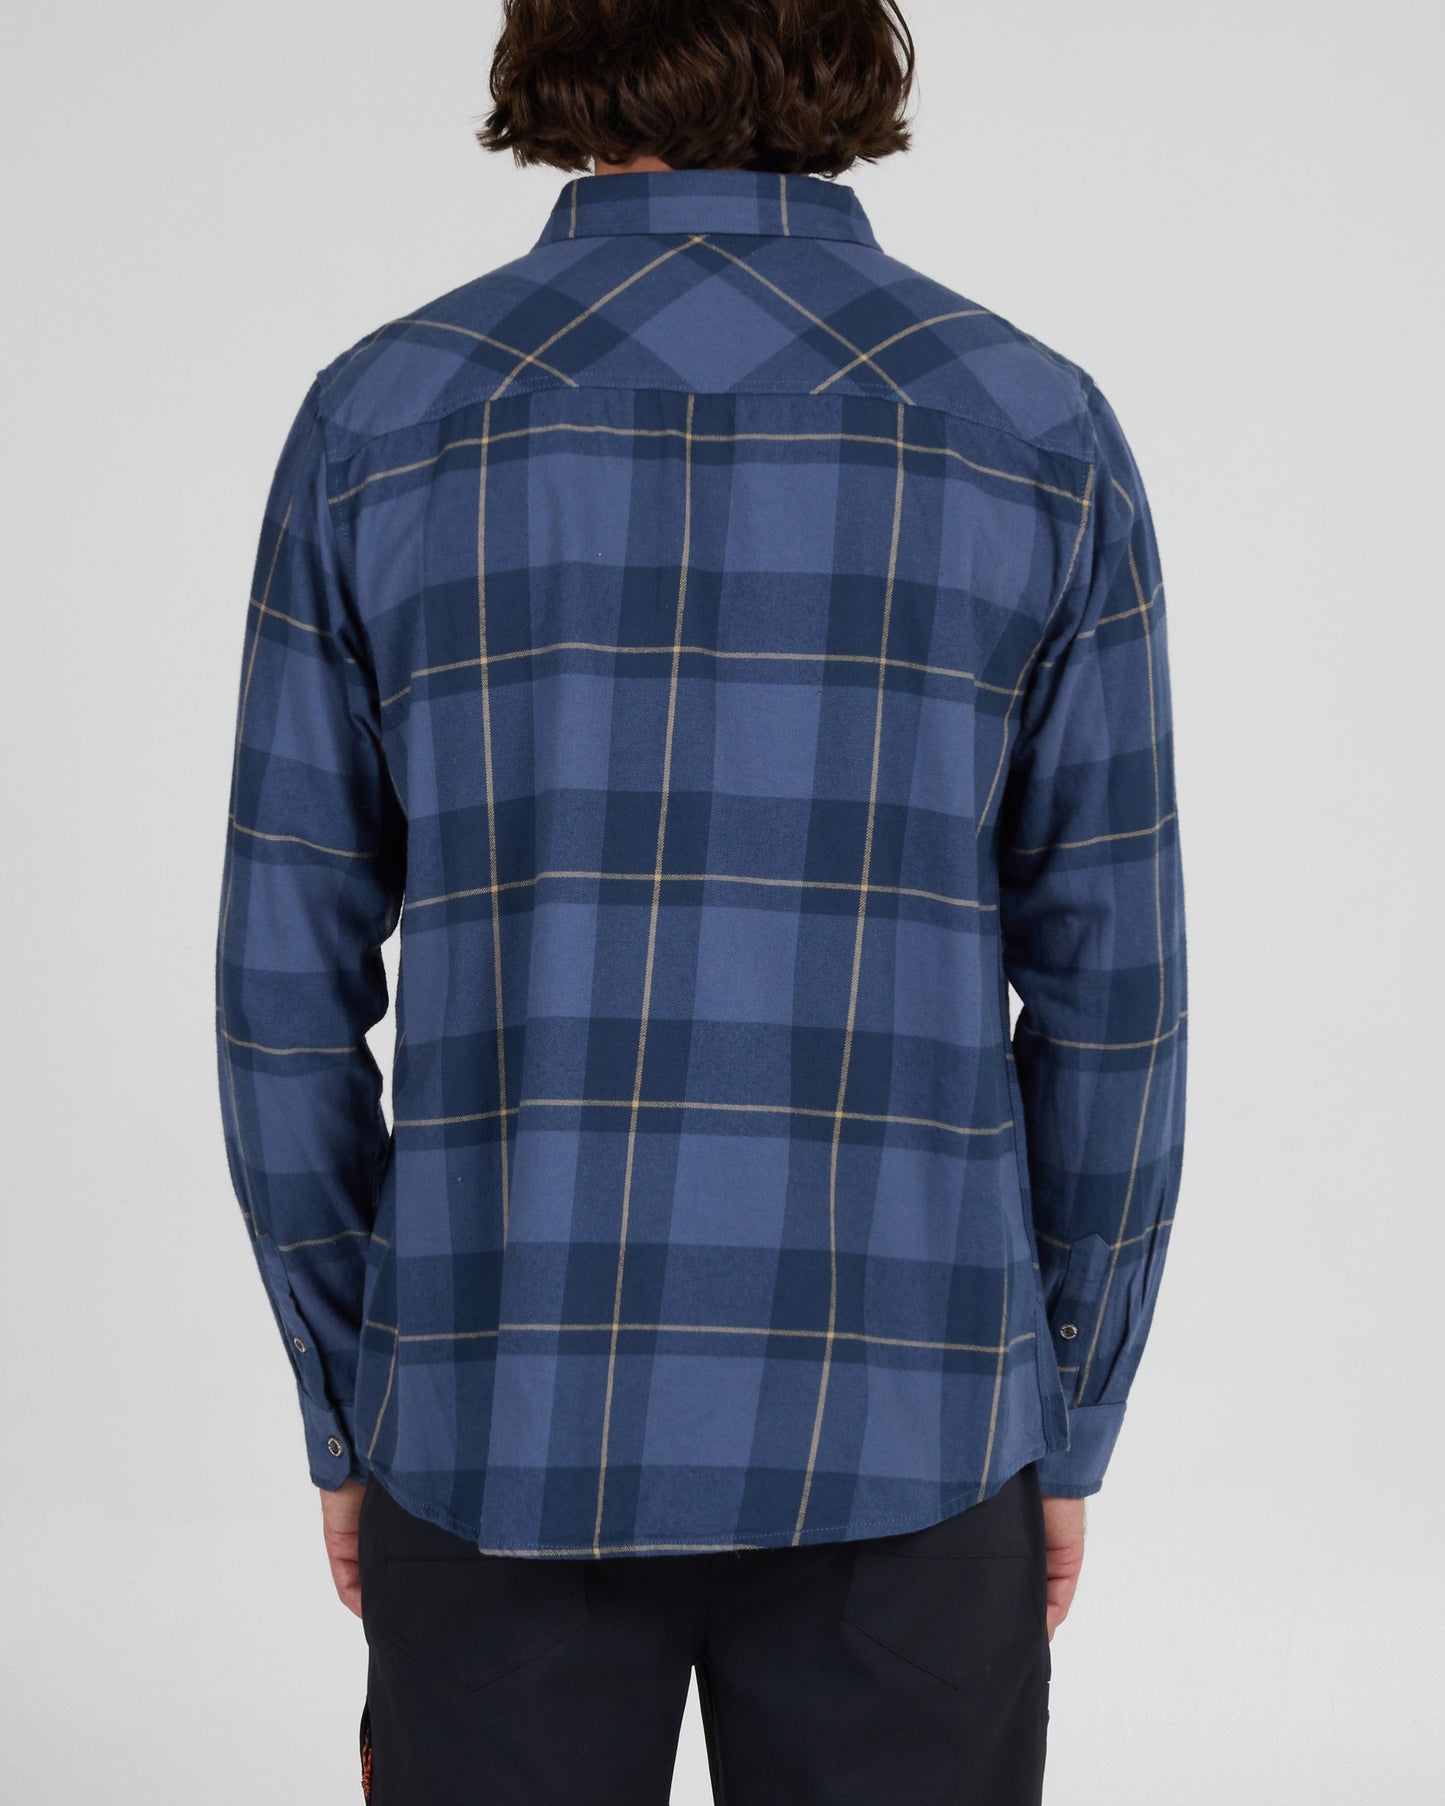 On body back of the First Light Navy Blue Flannel